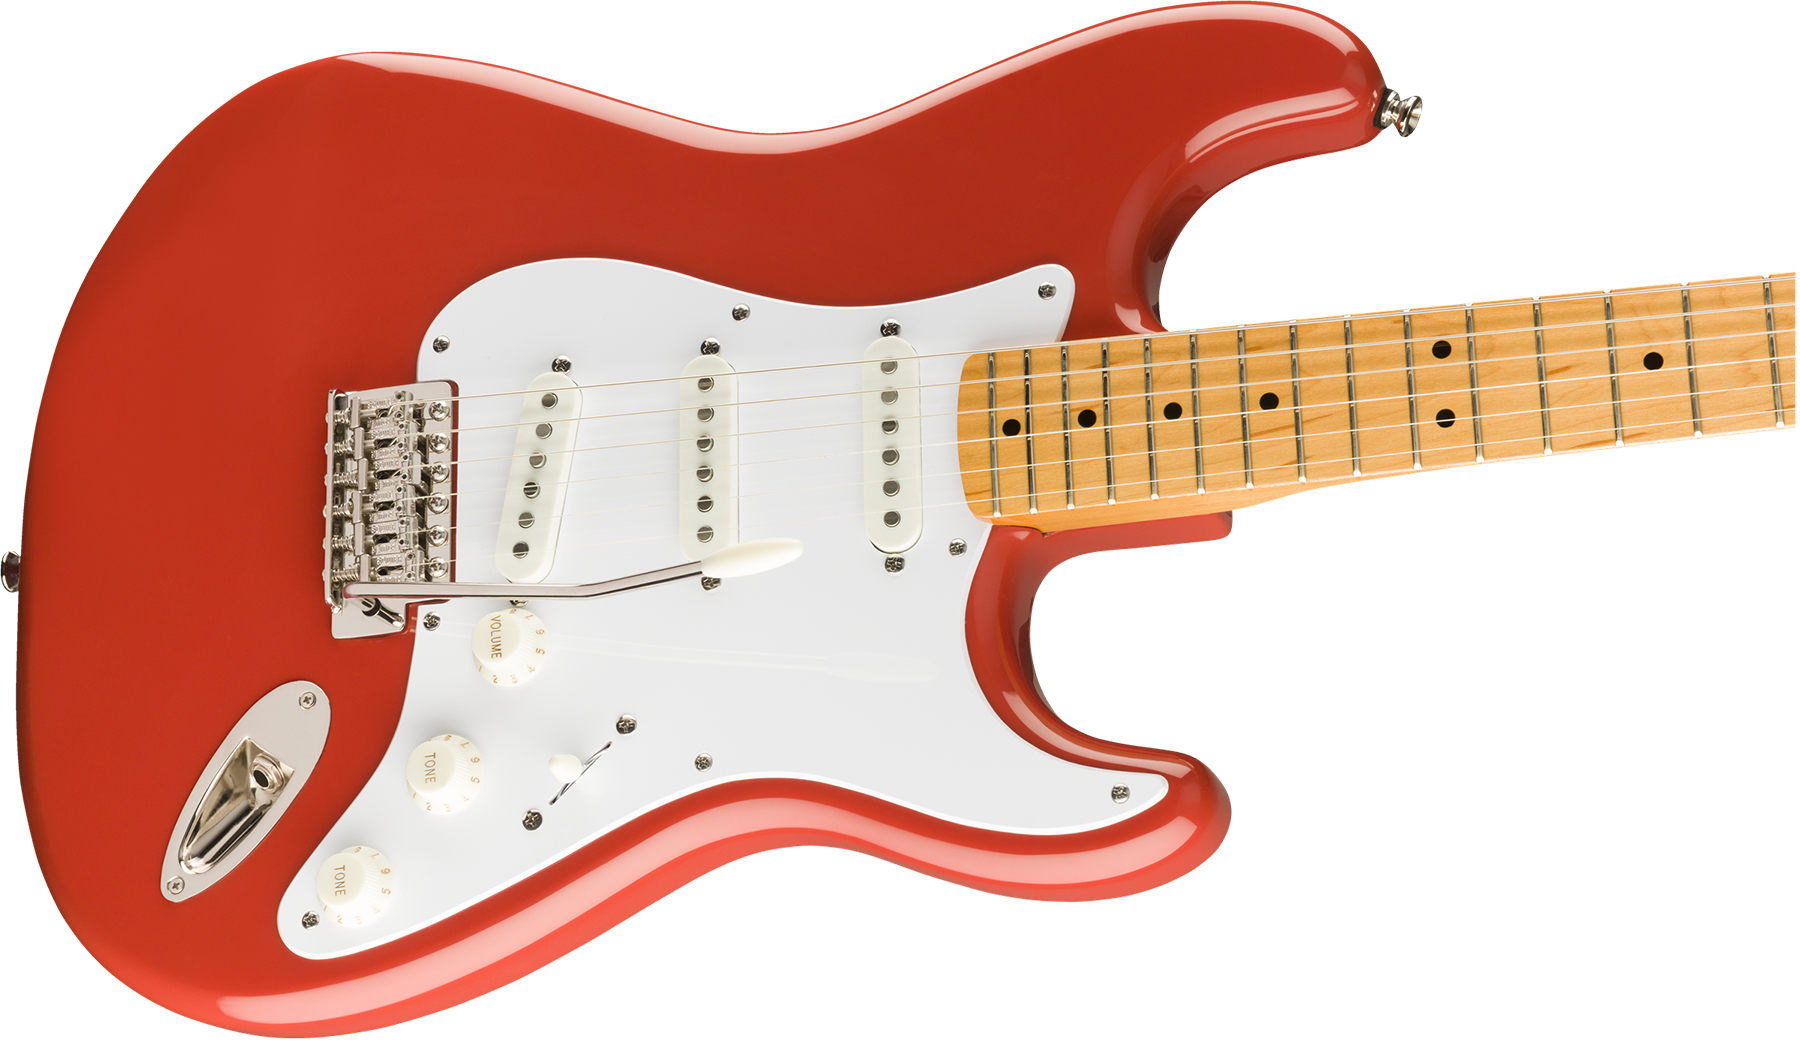 Squier Strat '50s Classic Vibe 2019 Mn 2019 - Fiesta Red - Str shape electric guitar - Variation 2